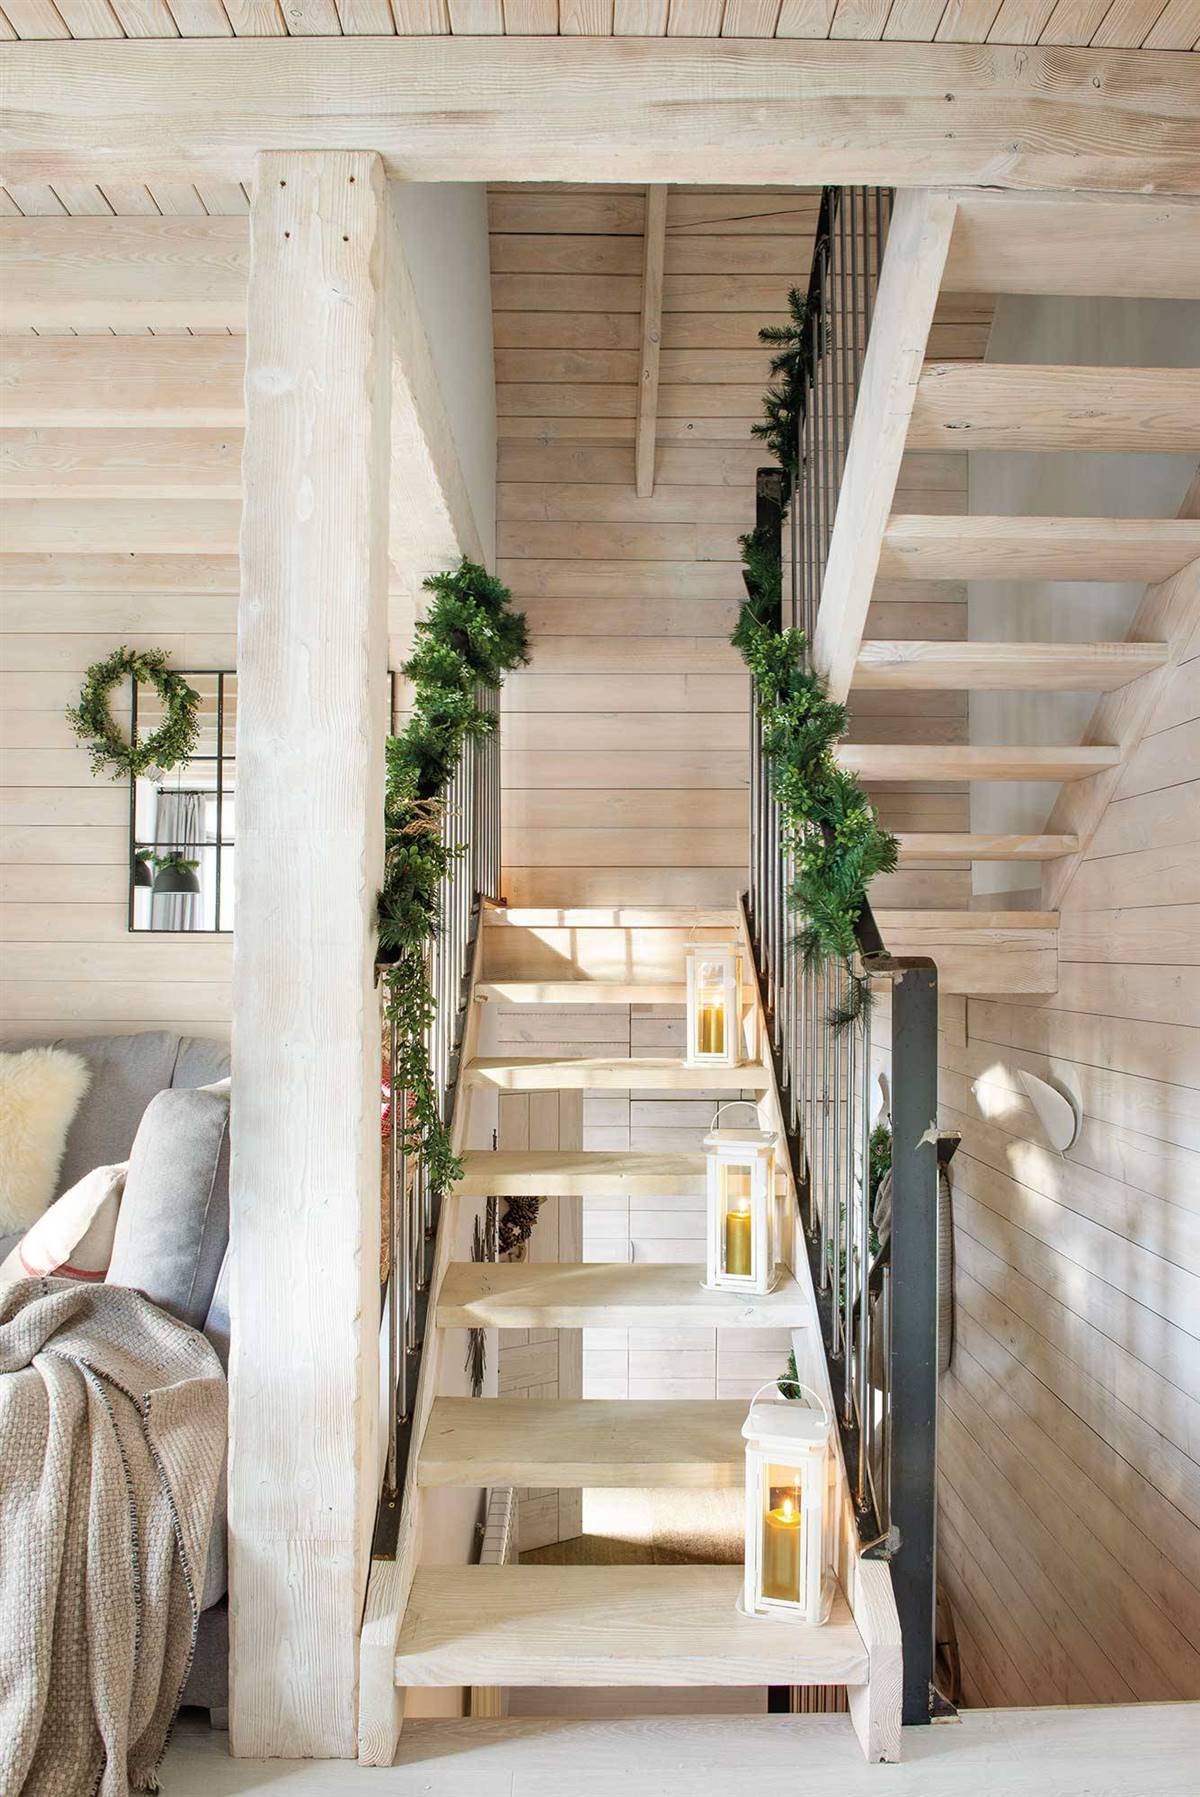 STAIRCASE DECORATED FOR CHRISTMAS WITH LANTERNS AND A PINE GARLAND